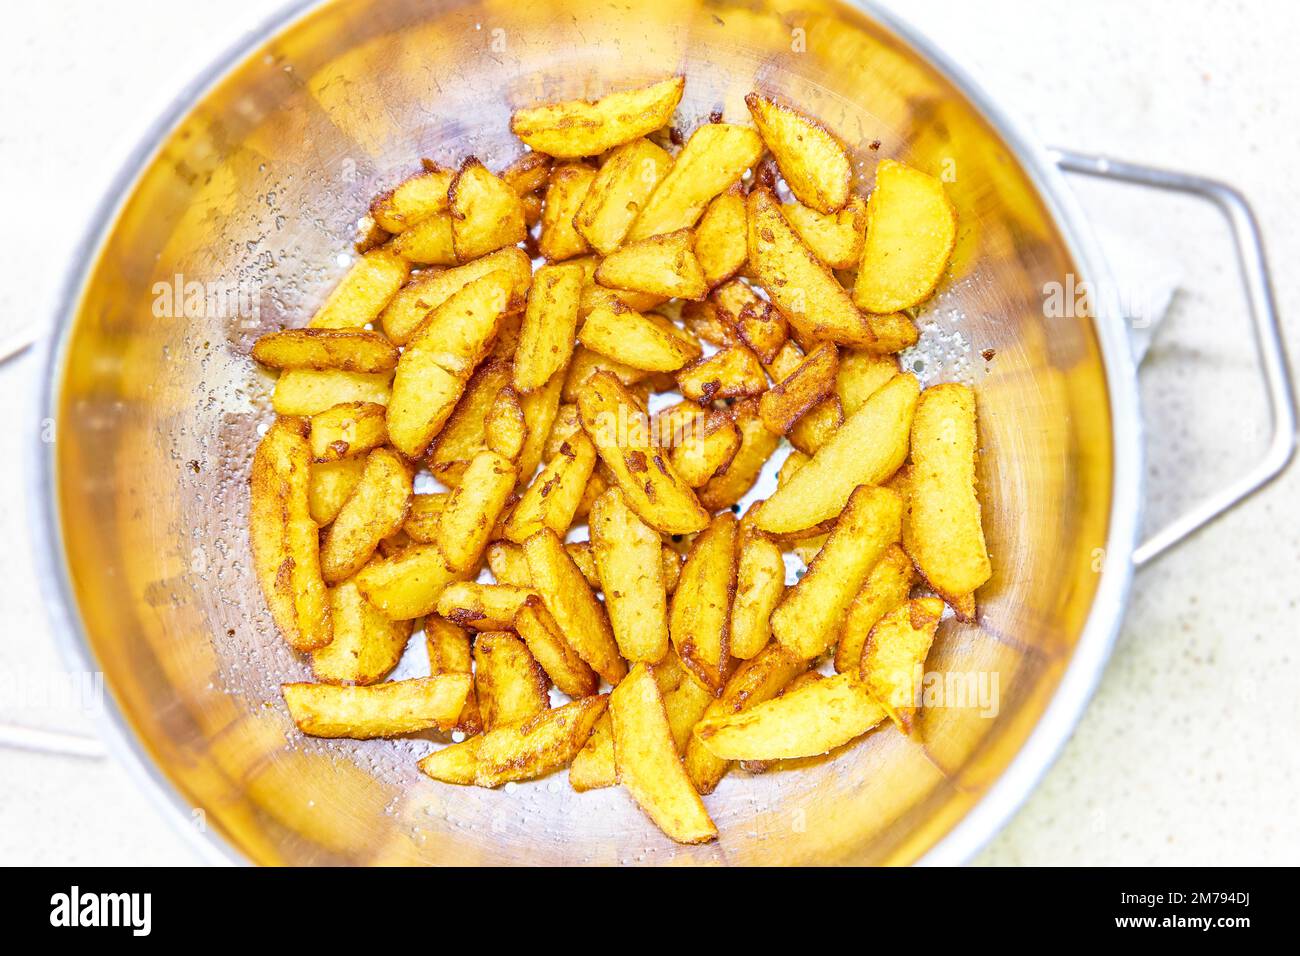 French fries draining the excess fat, after frying, in a sieve. Stock Photo